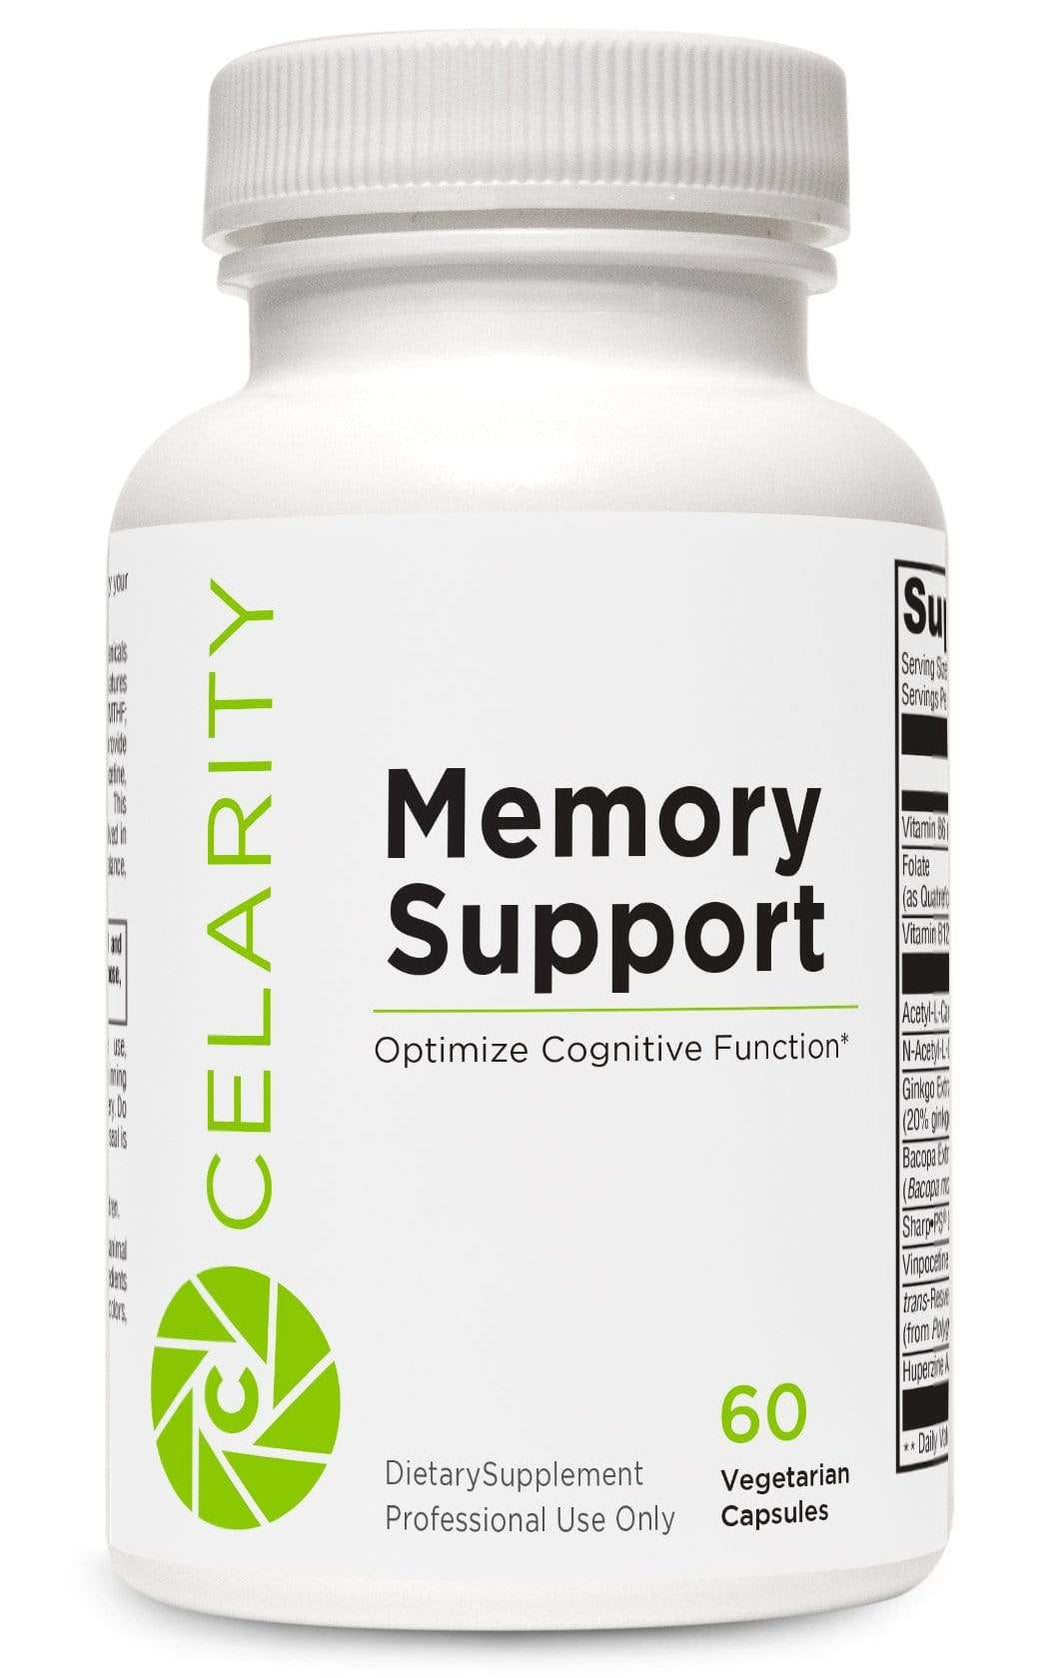 Celarity Memory Support